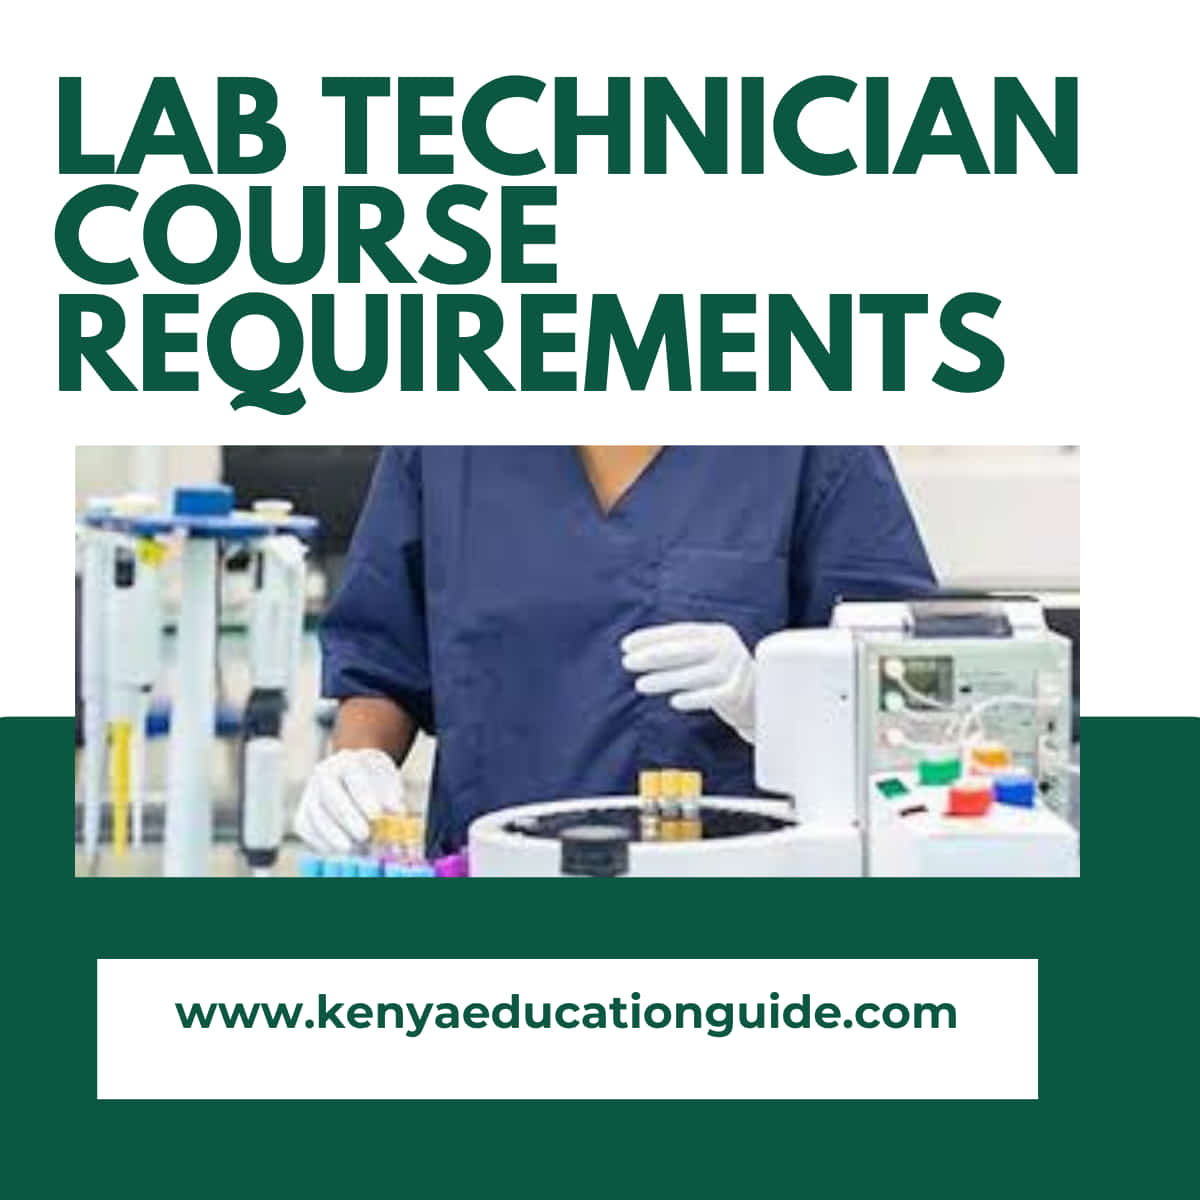 Lab technician course requirements